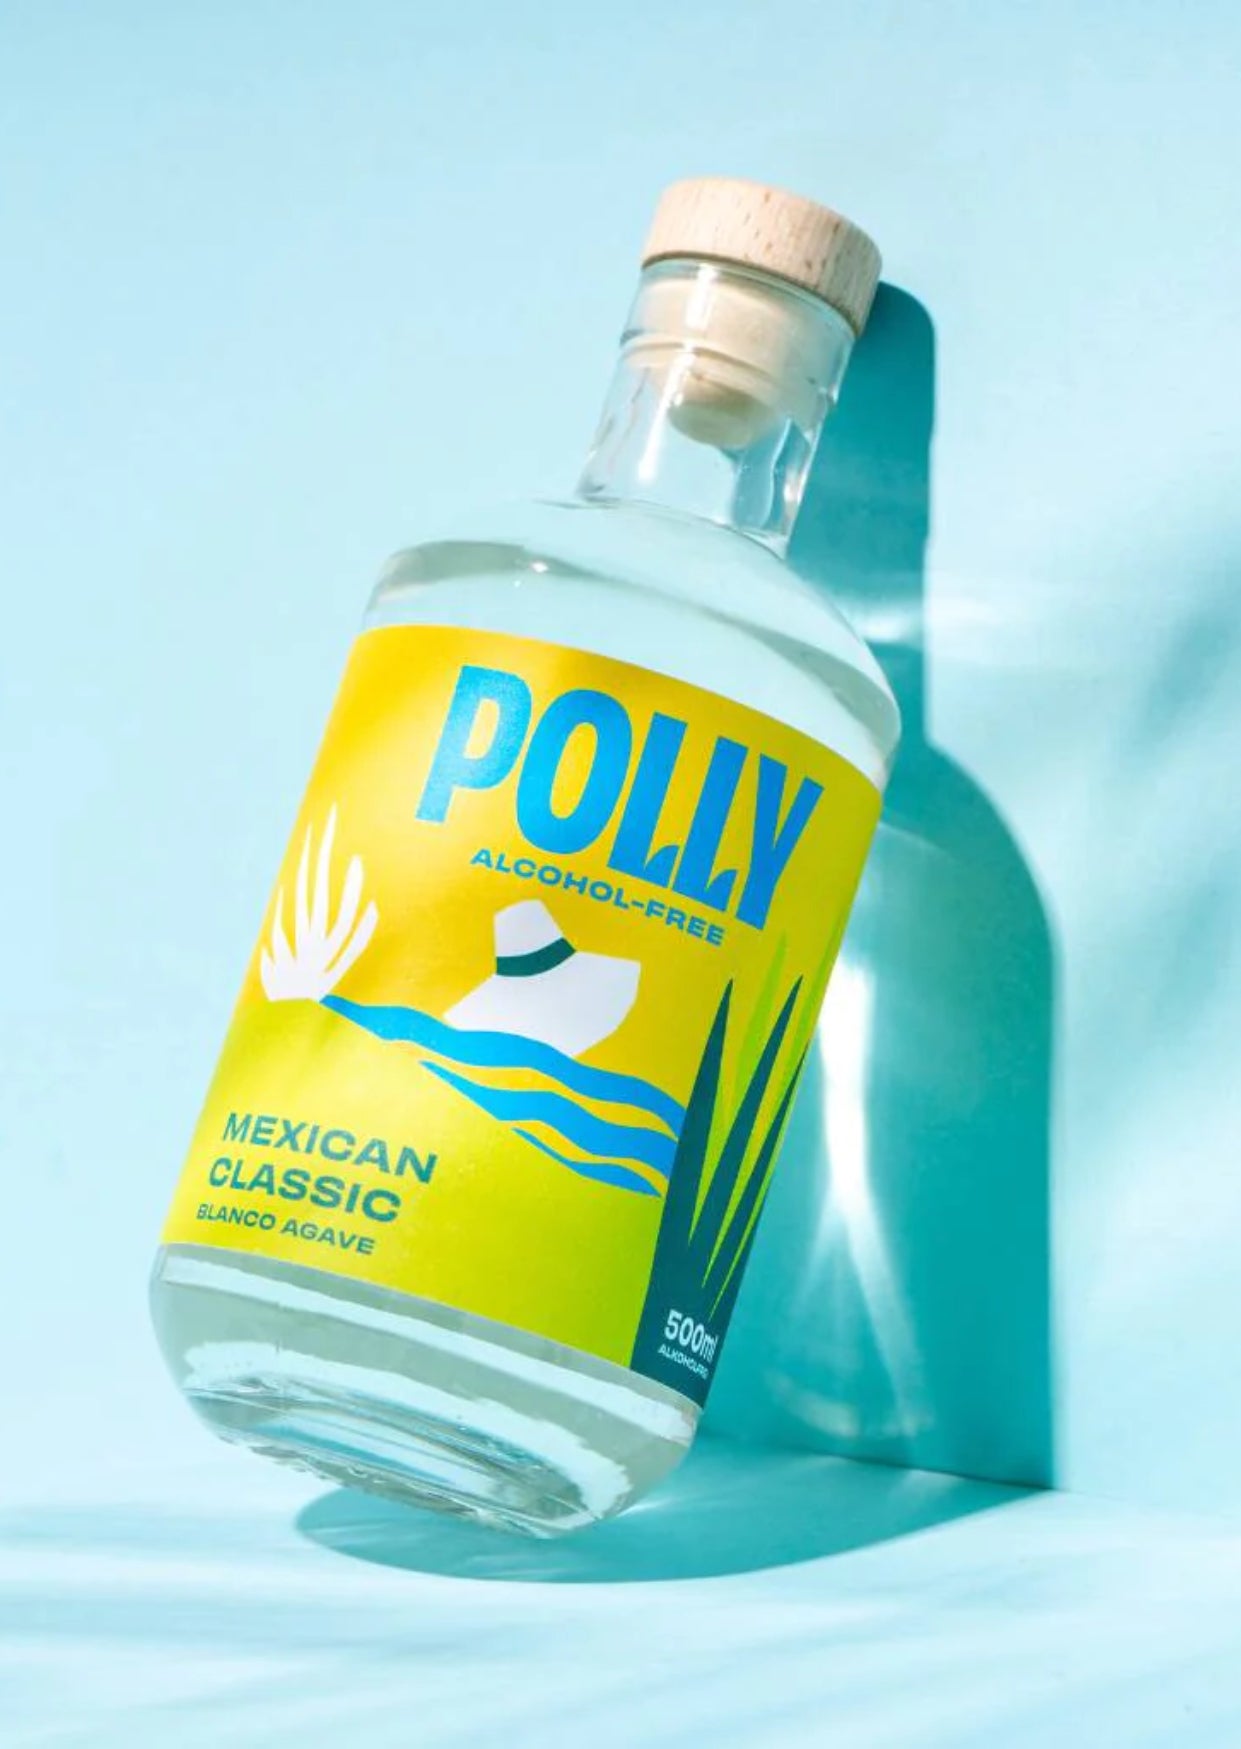 Polly Mexican Classic Alkoholfrei 500ml